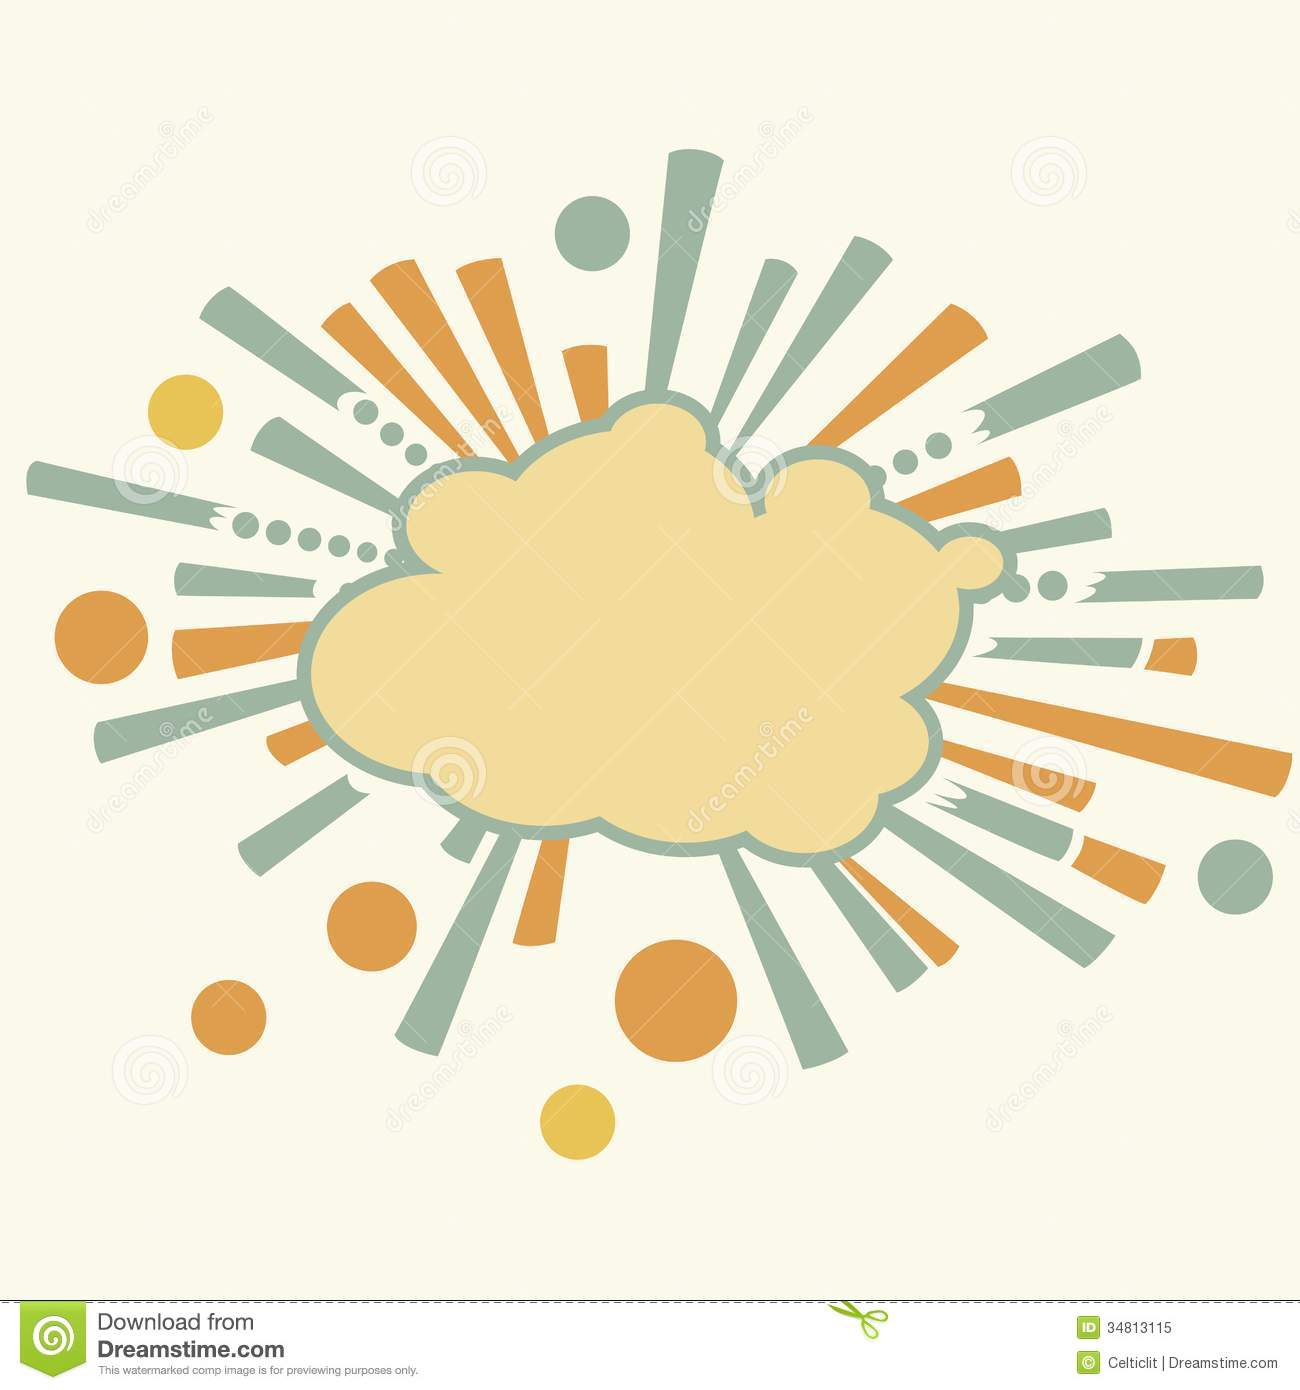 Burst And Boom Cloud In Retro Style Royalty Free Stock Photo   Image